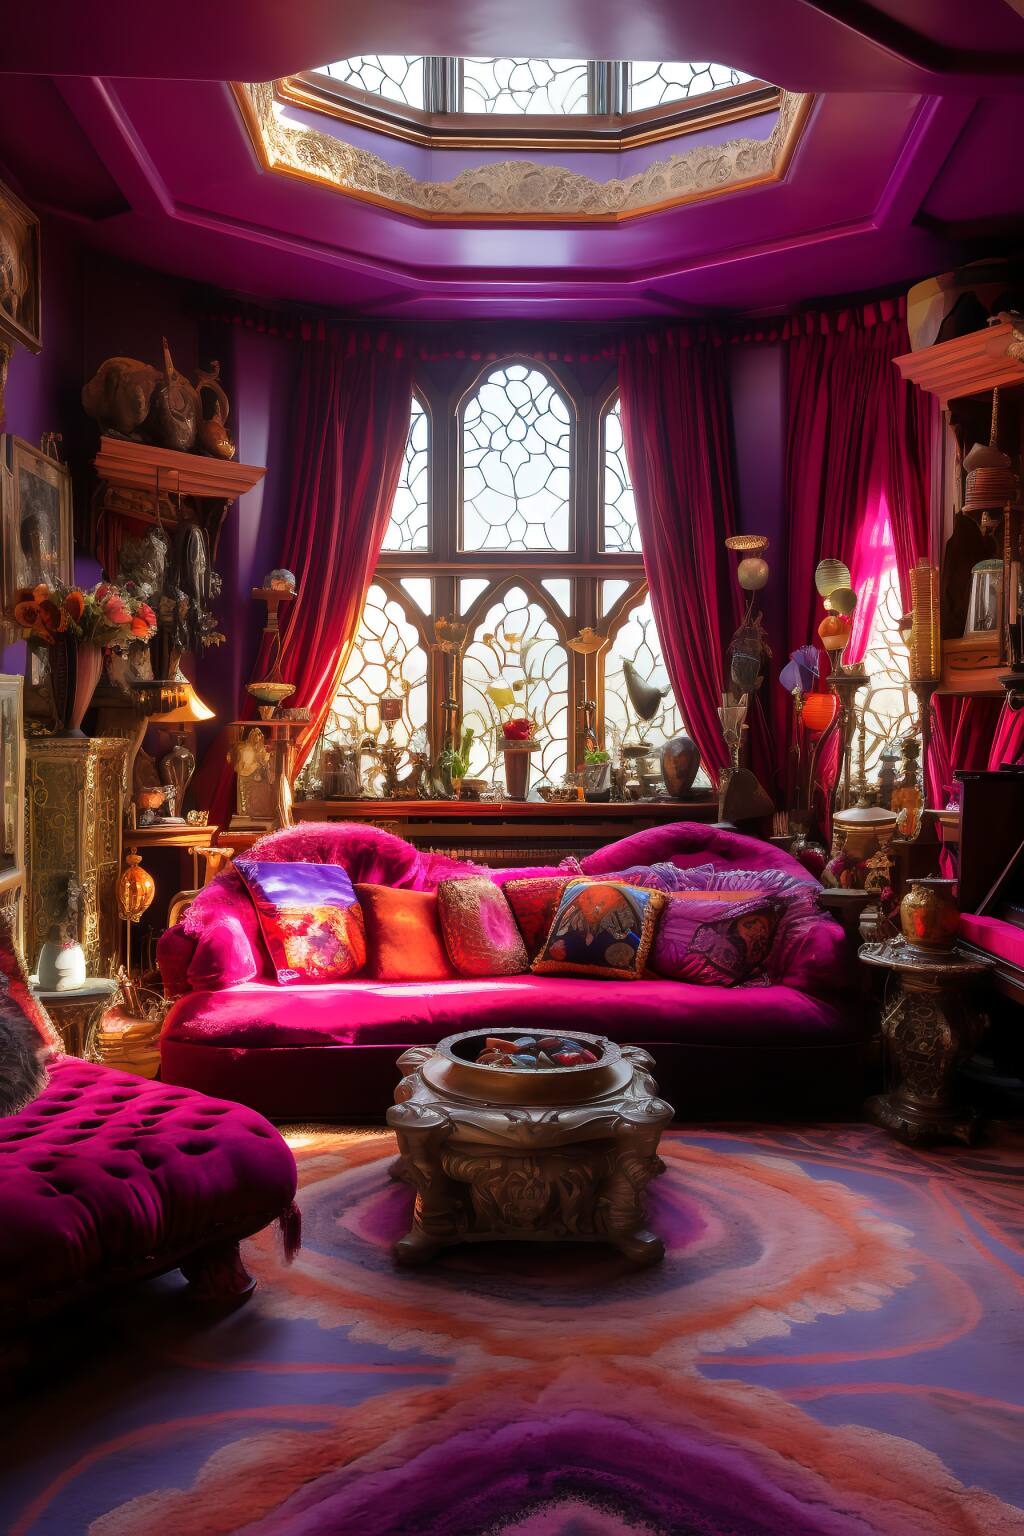 Luxurious Bohemian Living Room In Purple And Gold, Featuring A Velvet Loveseat, Brass Side Table, And Ornate Mirrors.